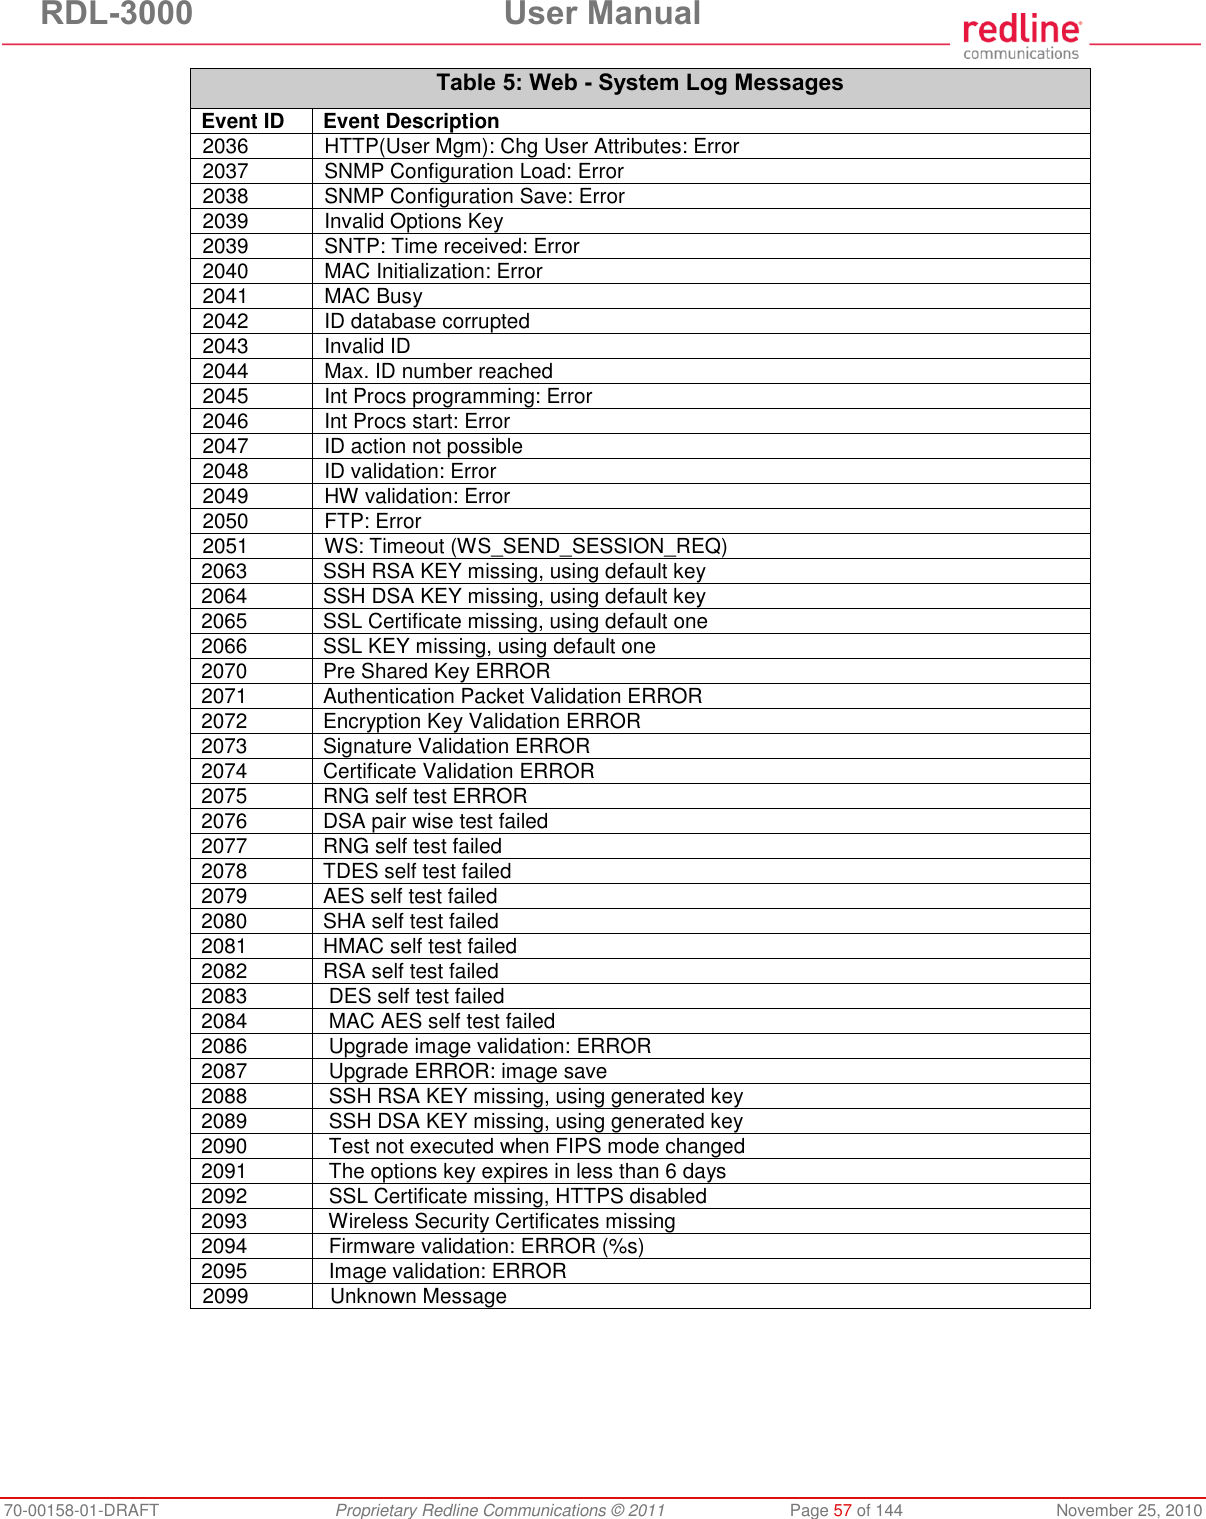 RDL-3000  User Manual 70-00158-01-DRAFT  Proprietary Redline Communications © 2011  Page 57 of 144  November 25, 2010 Table 5: Web - System Log Messages Event ID Event Description 2036  HTTP(User Mgm): Chg User Attributes: Error 2037  SNMP Configuration Load: Error 2038  SNMP Configuration Save: Error 2039  Invalid Options Key 2039  SNTP: Time received: Error 2040  MAC Initialization: Error 2041  MAC Busy 2042  ID database corrupted 2043  Invalid ID 2044  Max. ID number reached 2045  Int Procs programming: Error 2046  Int Procs start: Error 2047  ID action not possible 2048  ID validation: Error 2049  HW validation: Error 2050  FTP: Error 2051  WS: Timeout (WS_SEND_SESSION_REQ) 2063  SSH RSA KEY missing, using default key 2064  SSH DSA KEY missing, using default key 2065  SSL Certificate missing, using default one 2066  SSL KEY missing, using default one 2070  Pre Shared Key ERROR 2071  Authentication Packet Validation ERROR 2072  Encryption Key Validation ERROR 2073  Signature Validation ERROR 2074  Certificate Validation ERROR 2075  RNG self test ERROR 2076  DSA pair wise test failed   2077  RNG self test failed 2078  TDES self test failed 2079  AES self test failed 2080  SHA self test failed 2081  HMAC self test failed 2082  RSA self test failed 2083   DES self test failed 2084   MAC AES self test failed 2086   Upgrade image validation: ERROR 2087   Upgrade ERROR: image save 2088   SSH RSA KEY missing, using generated key 2089   SSH DSA KEY missing, using generated key 2090   Test not executed when FIPS mode changed 2091   The options key expires in less than 6 days 2092   SSL Certificate missing, HTTPS disabled 2093   Wireless Security Certificates missing 2094   Firmware validation: ERROR (%s) 2095   Image validation: ERROR 2099   Unknown Message 